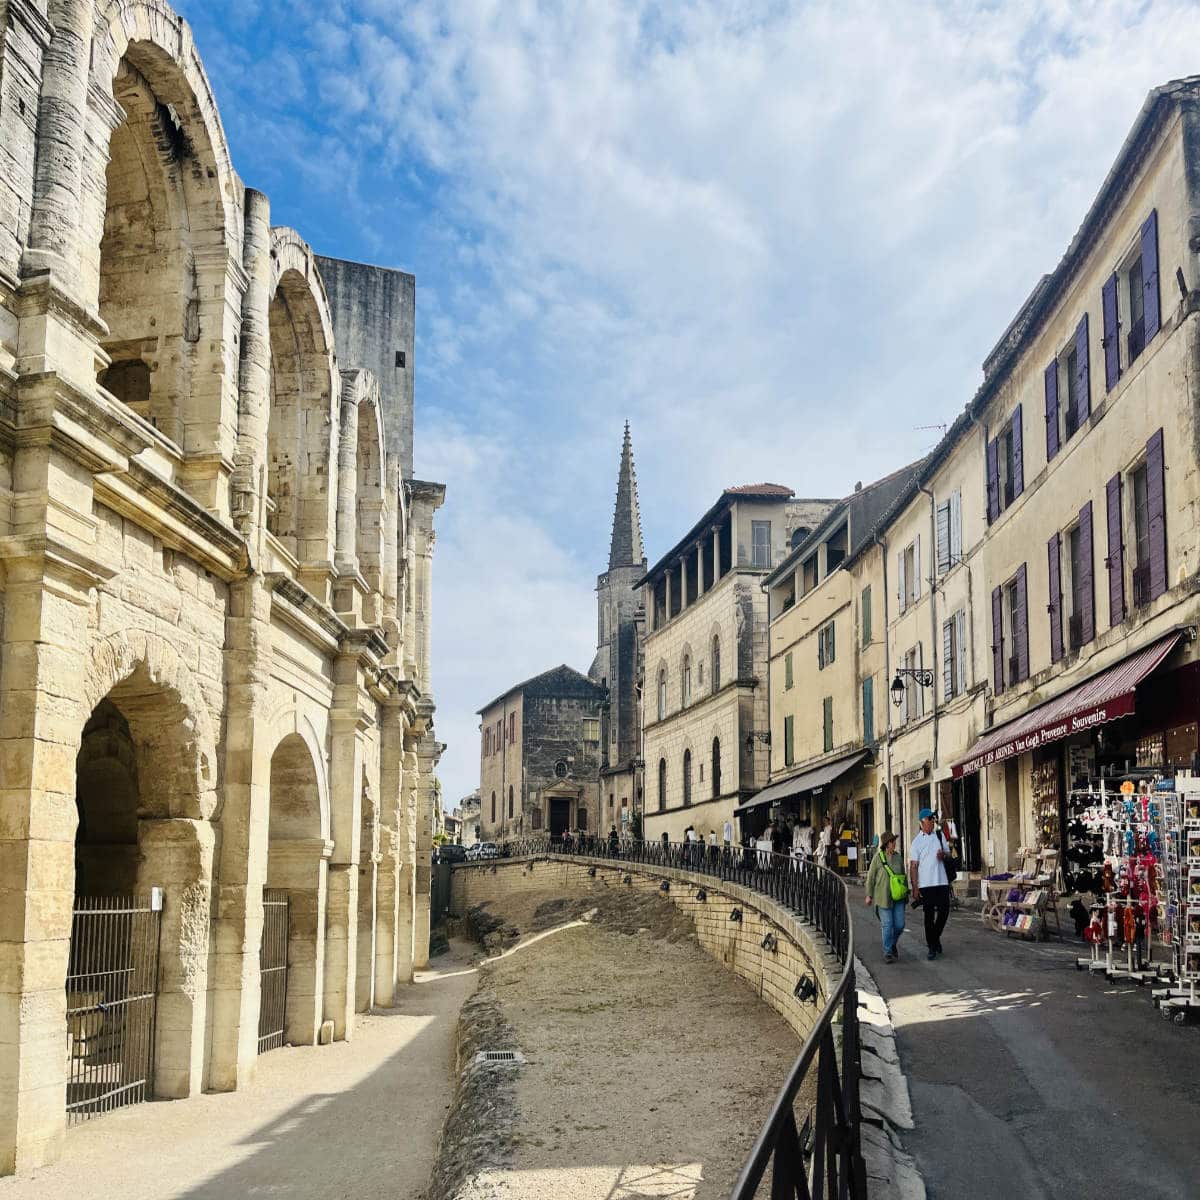 You are currently viewing Arles and its Roman ruins: City Guide (France)